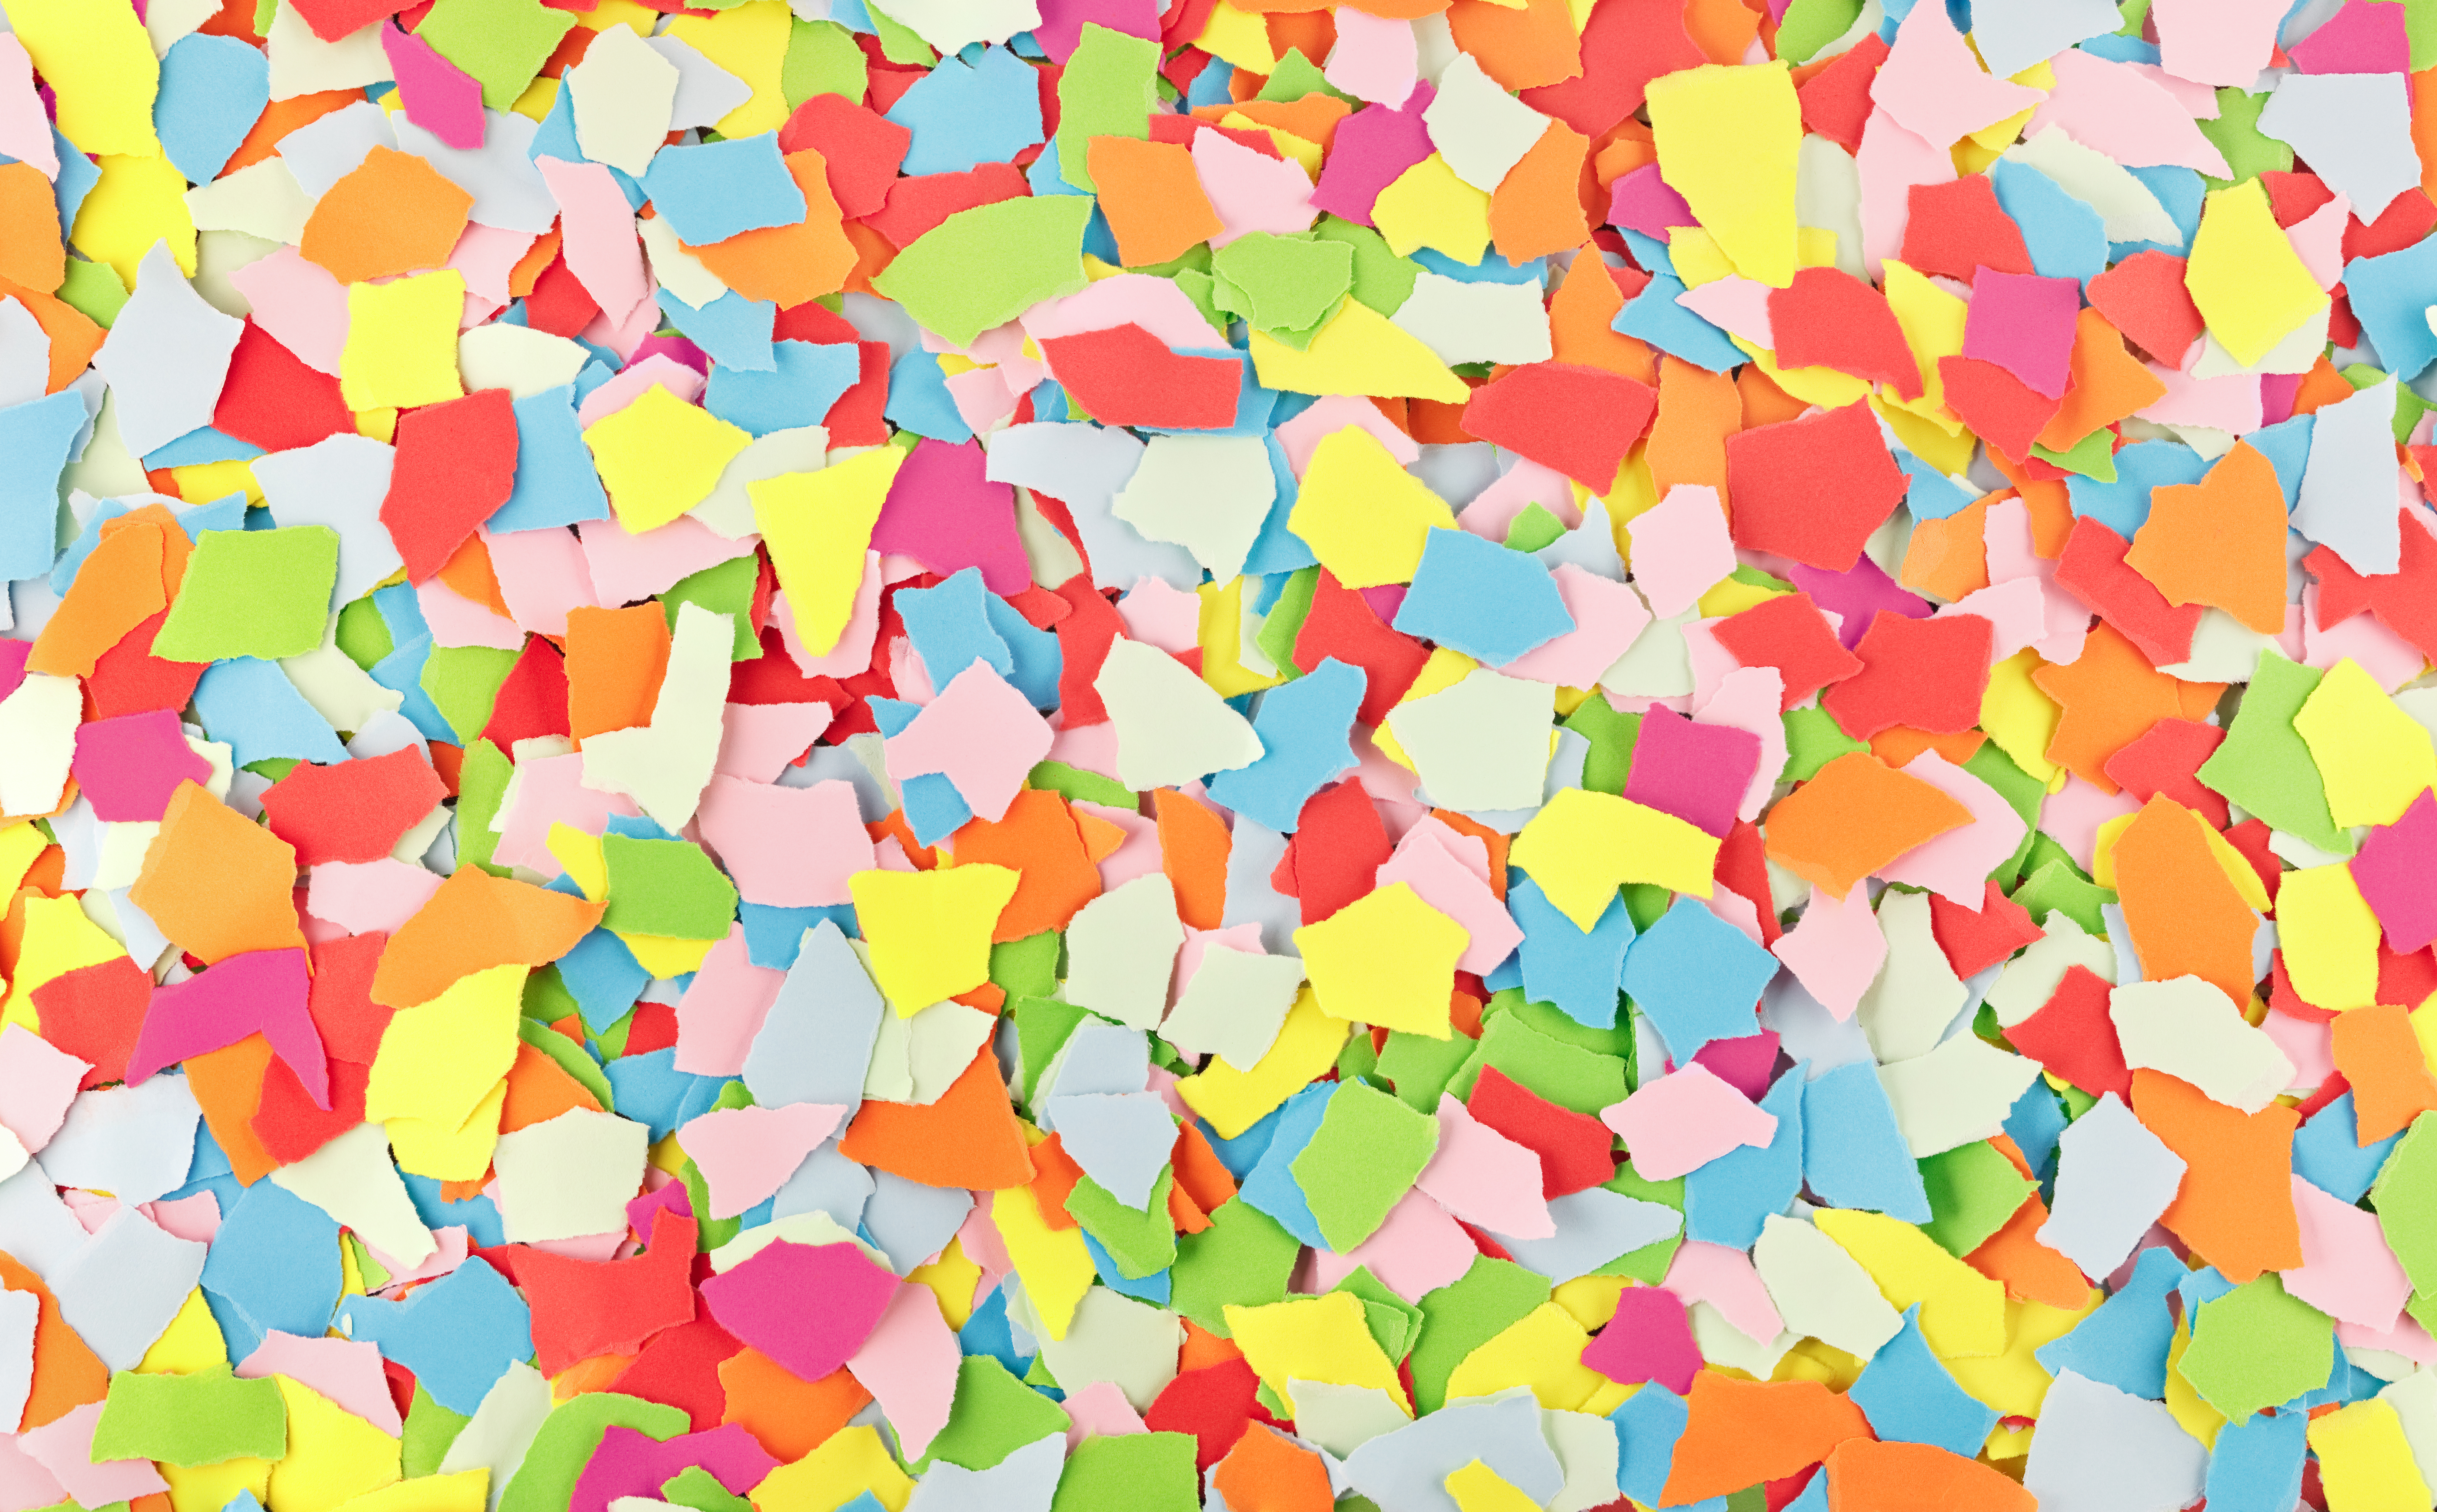 Image of colorful scraps of torn paper to represent snippets.